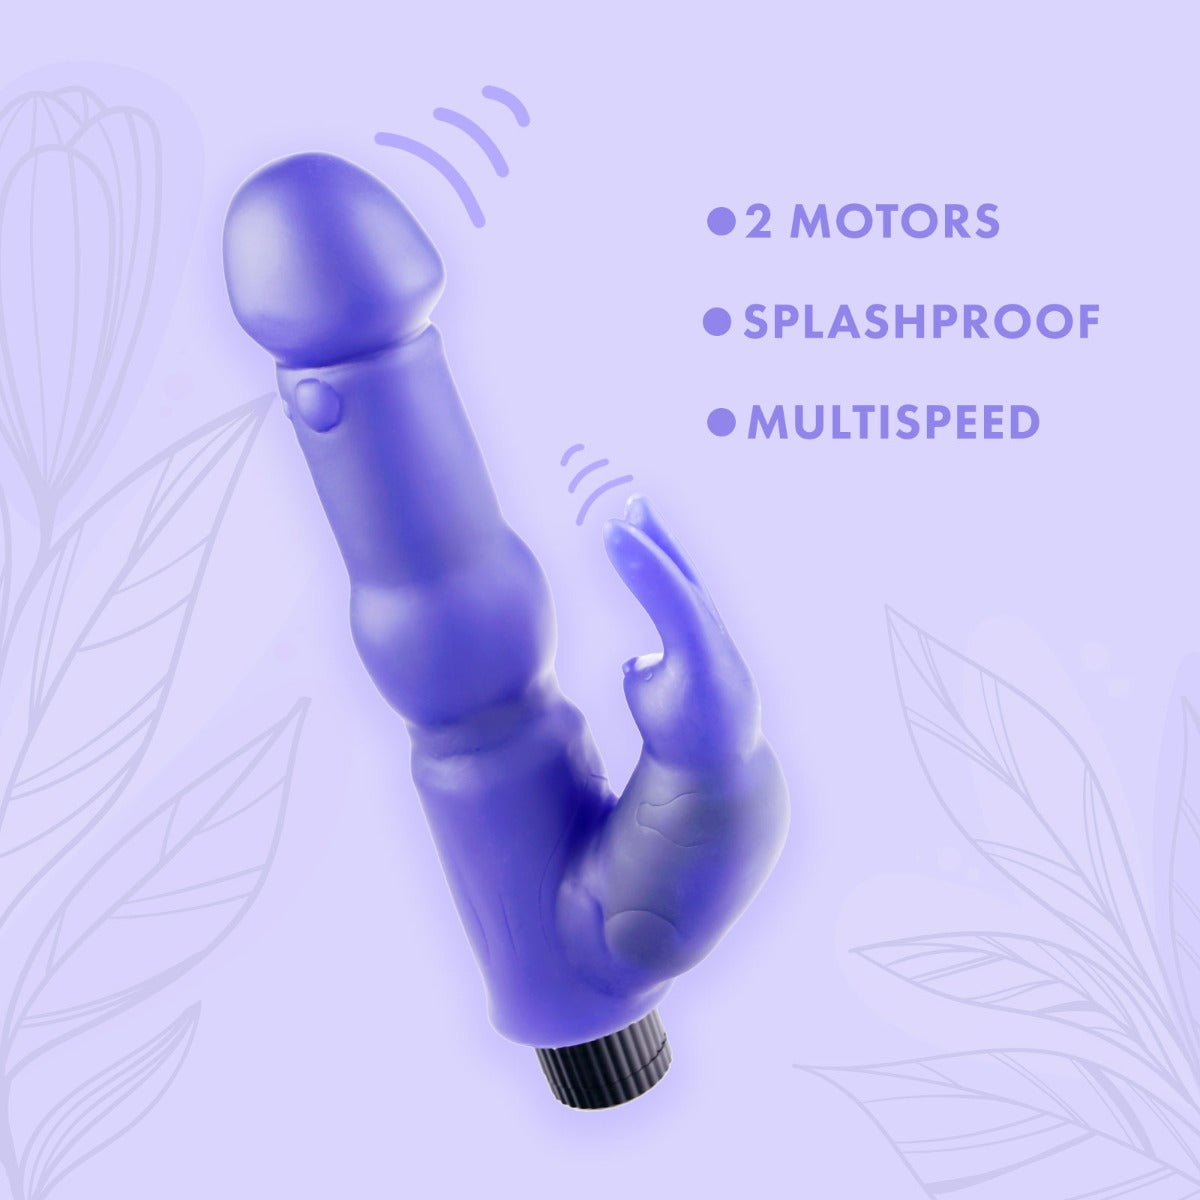 an image of a purple vibrating device on a white background